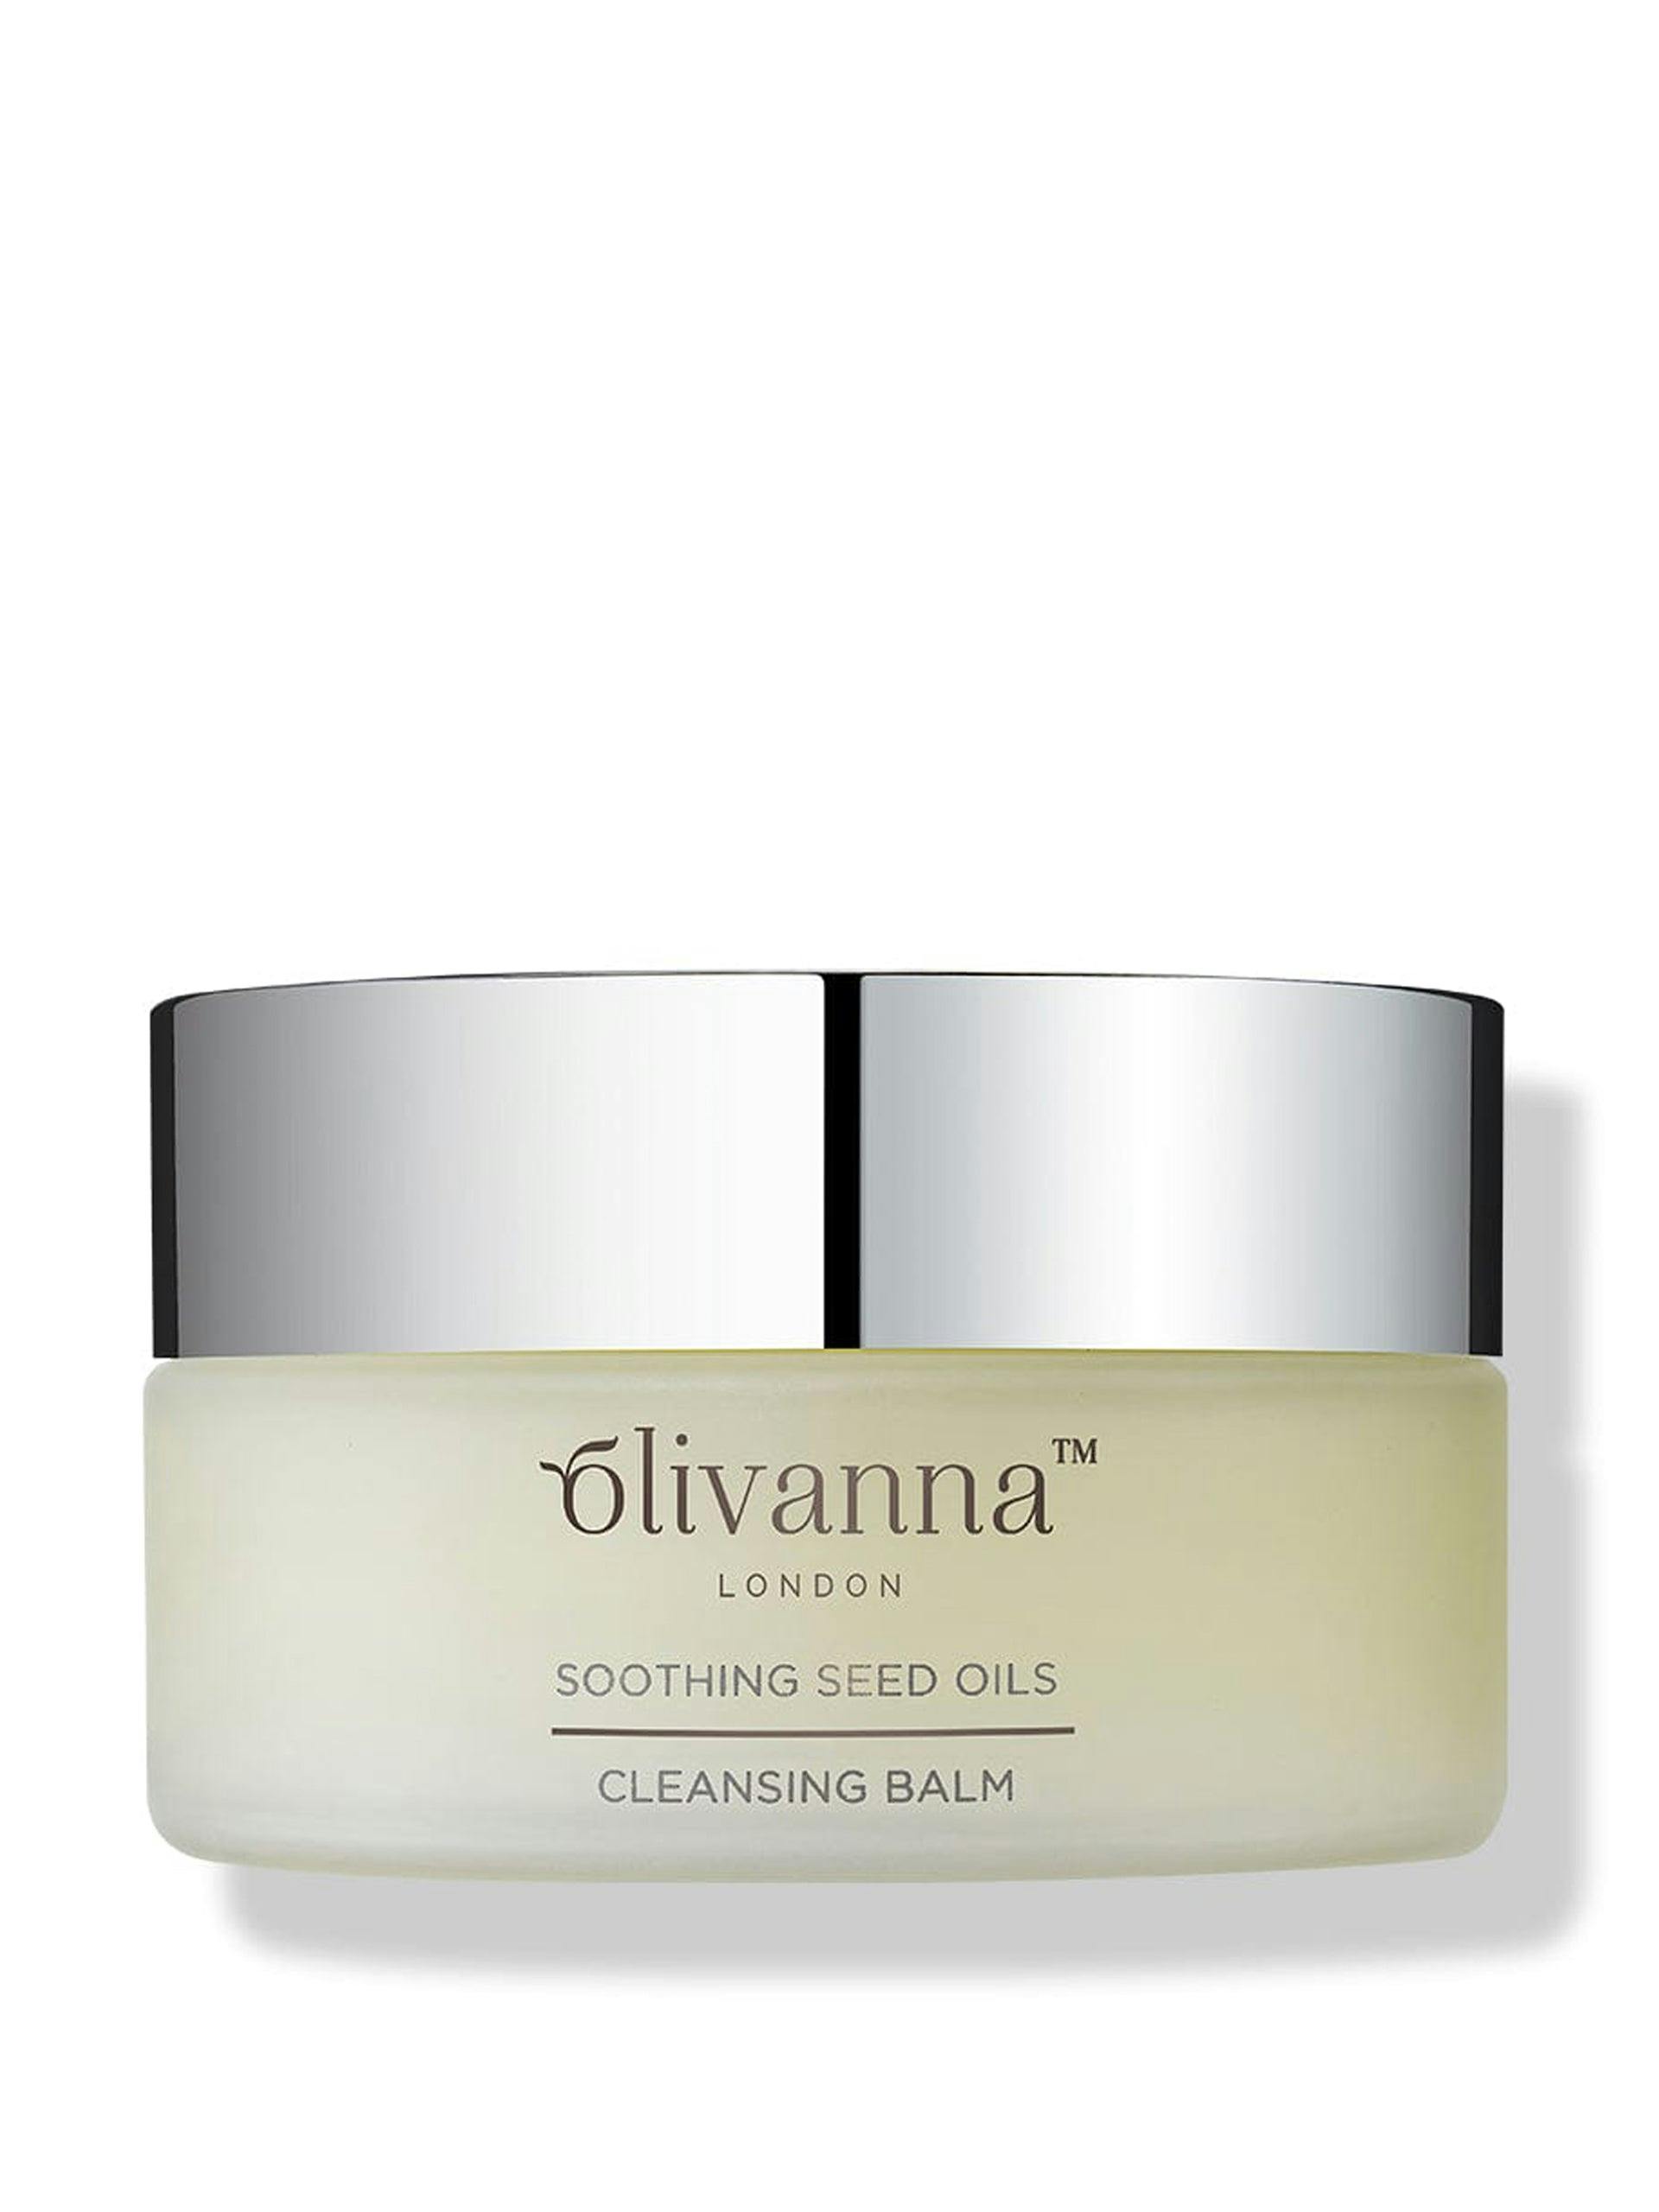 Soothing seed oils cleansing balm